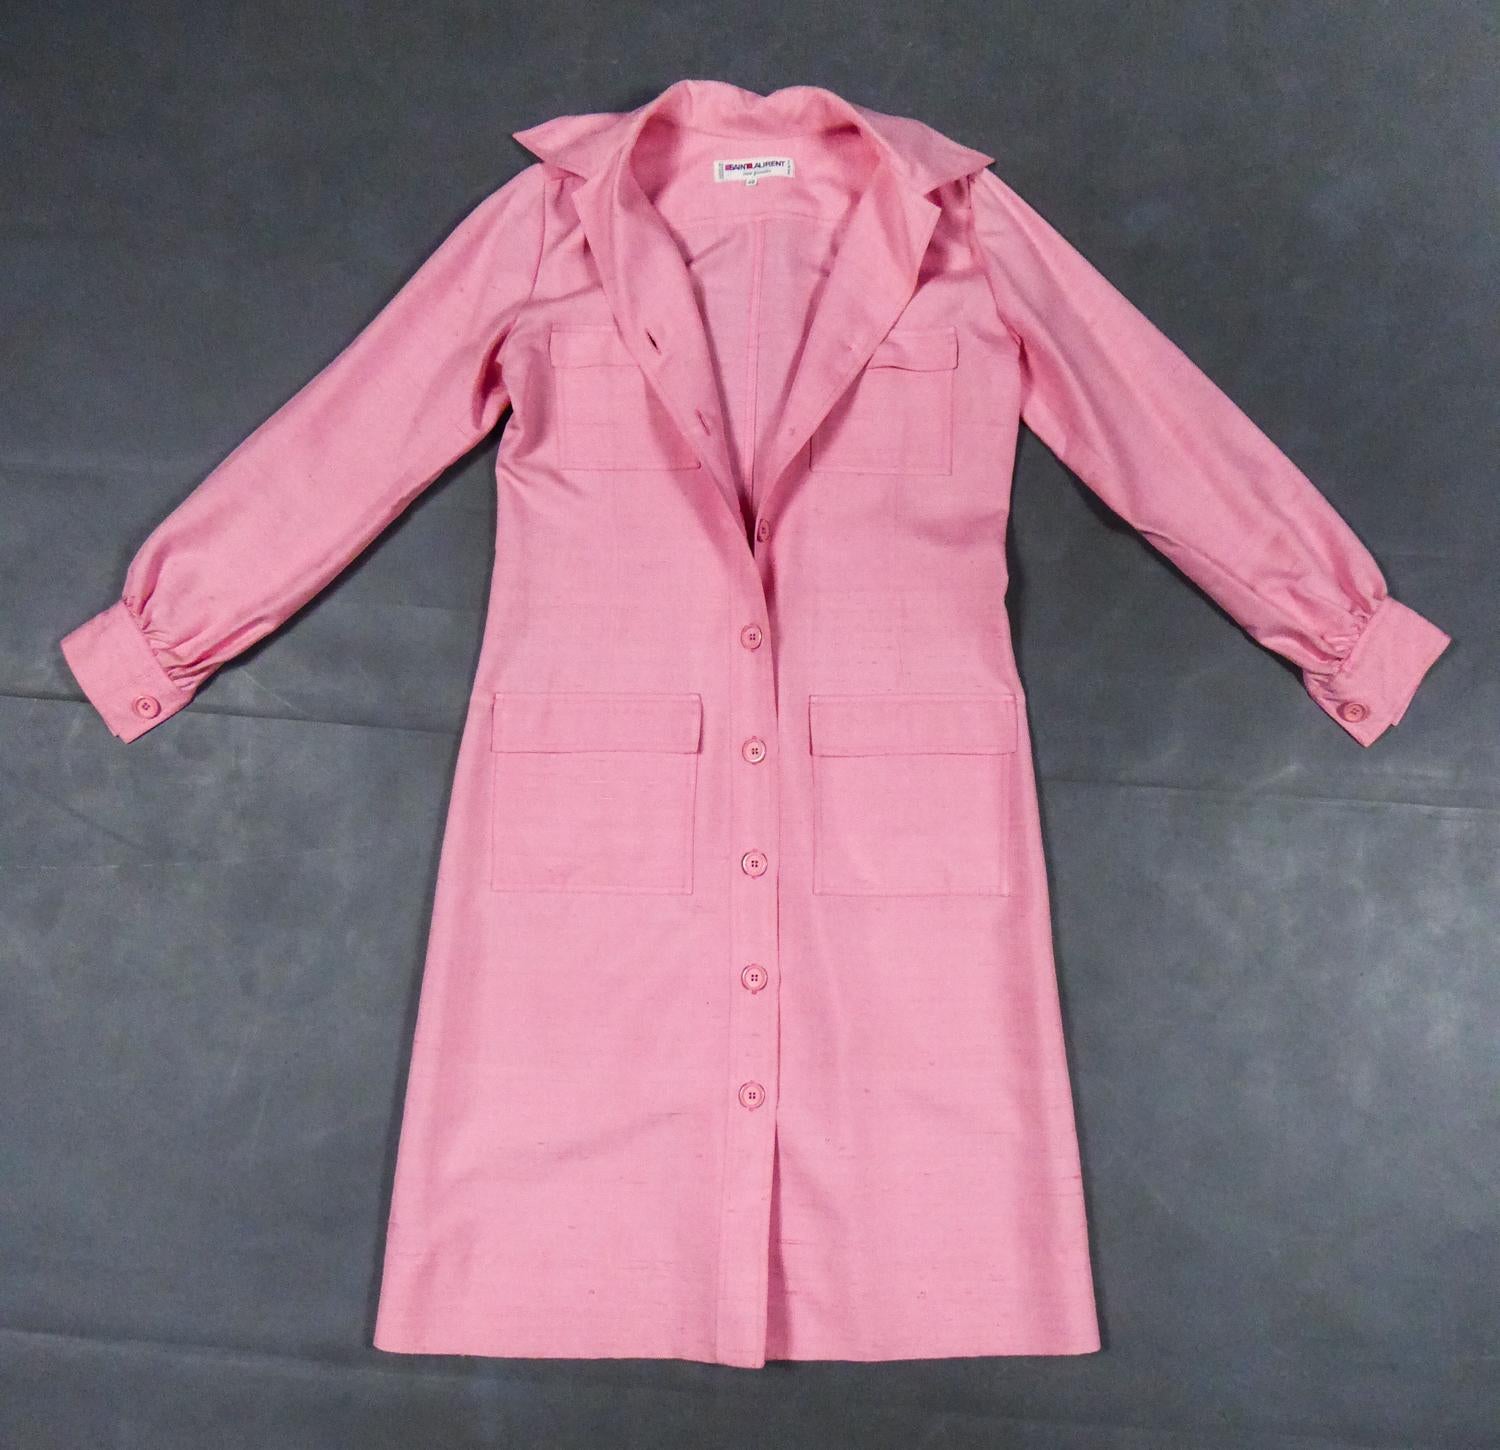 Circa 1980
France

Blouse dress in pink wild silk by Yves Saint Laurent in the spirit of 1970s Saharian style collections. Tubular line slightly flared from the bottom of the skirt. Long sleeves, Italian collar and large pockets with topstitch on